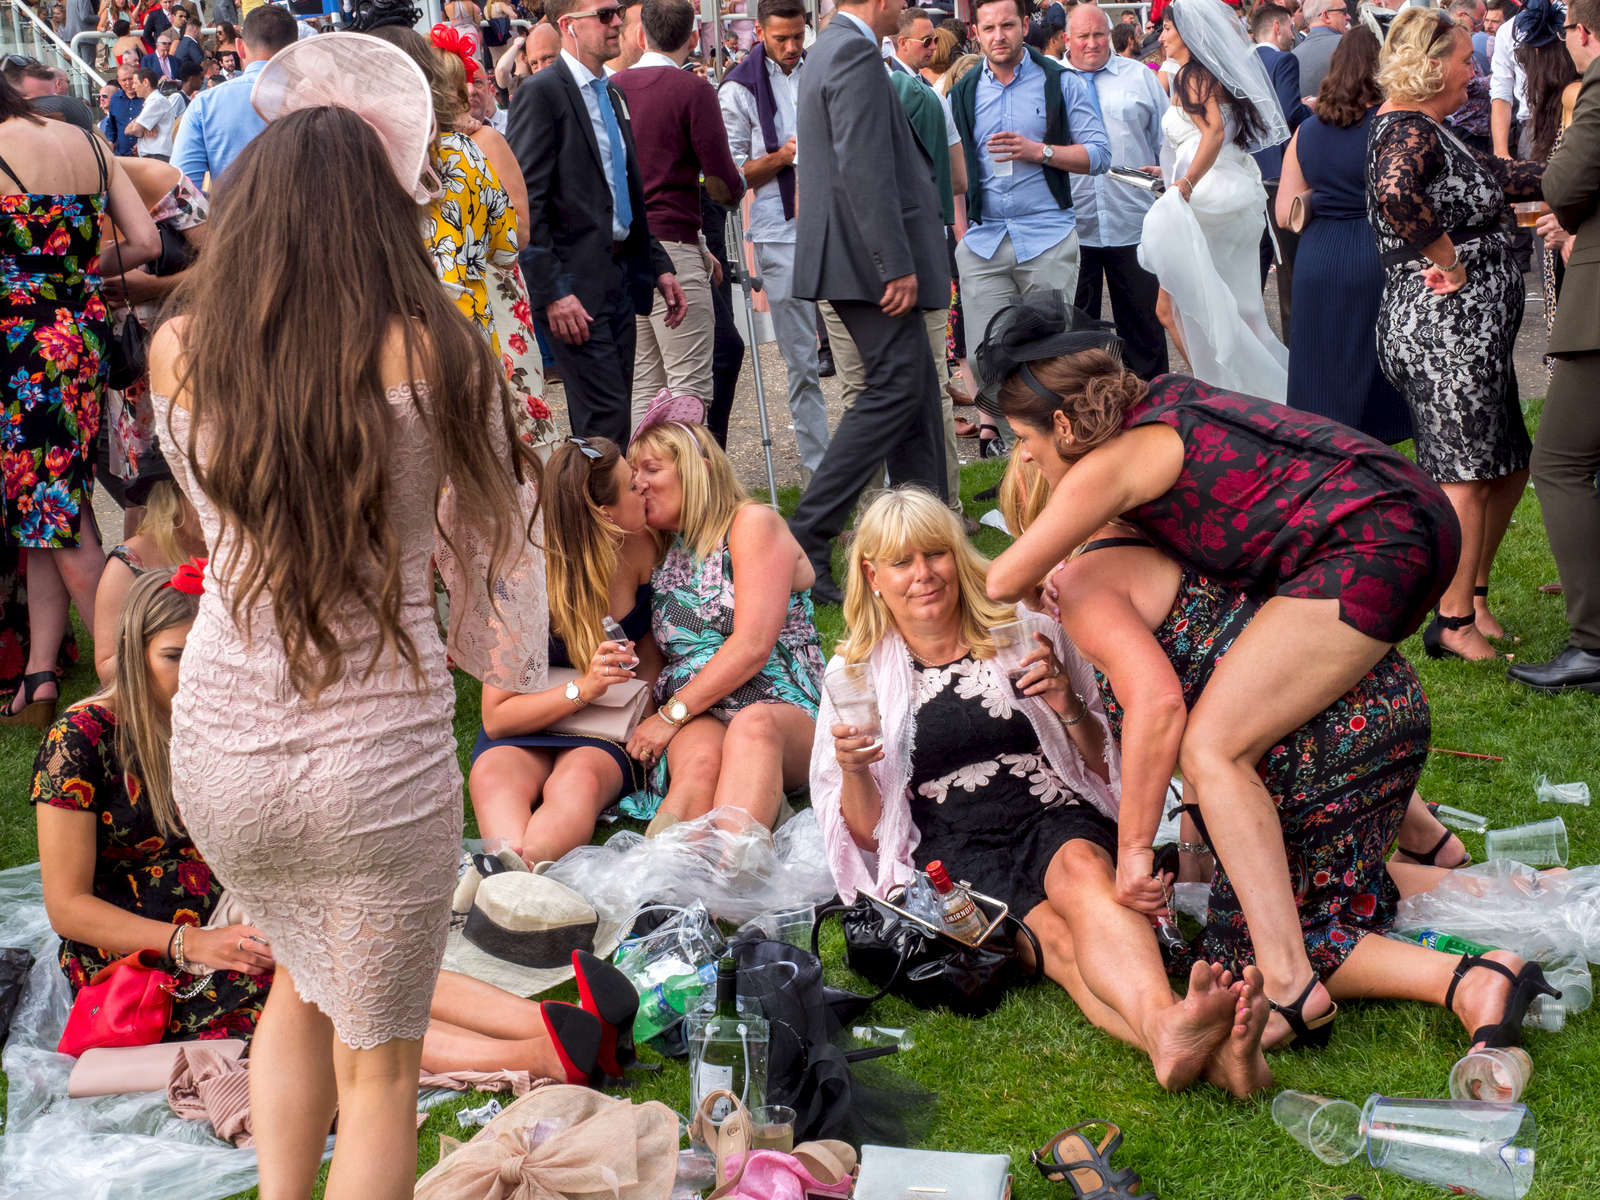 Less than lady like behaviour on Ladies' Day at Epsom.Ladies' Day is traditionally held on the first Friday of June, a multitude of ladies and gents head to Epsom Downs Racecourse to experience a day full of high octane racing, music, glamour and fashion.